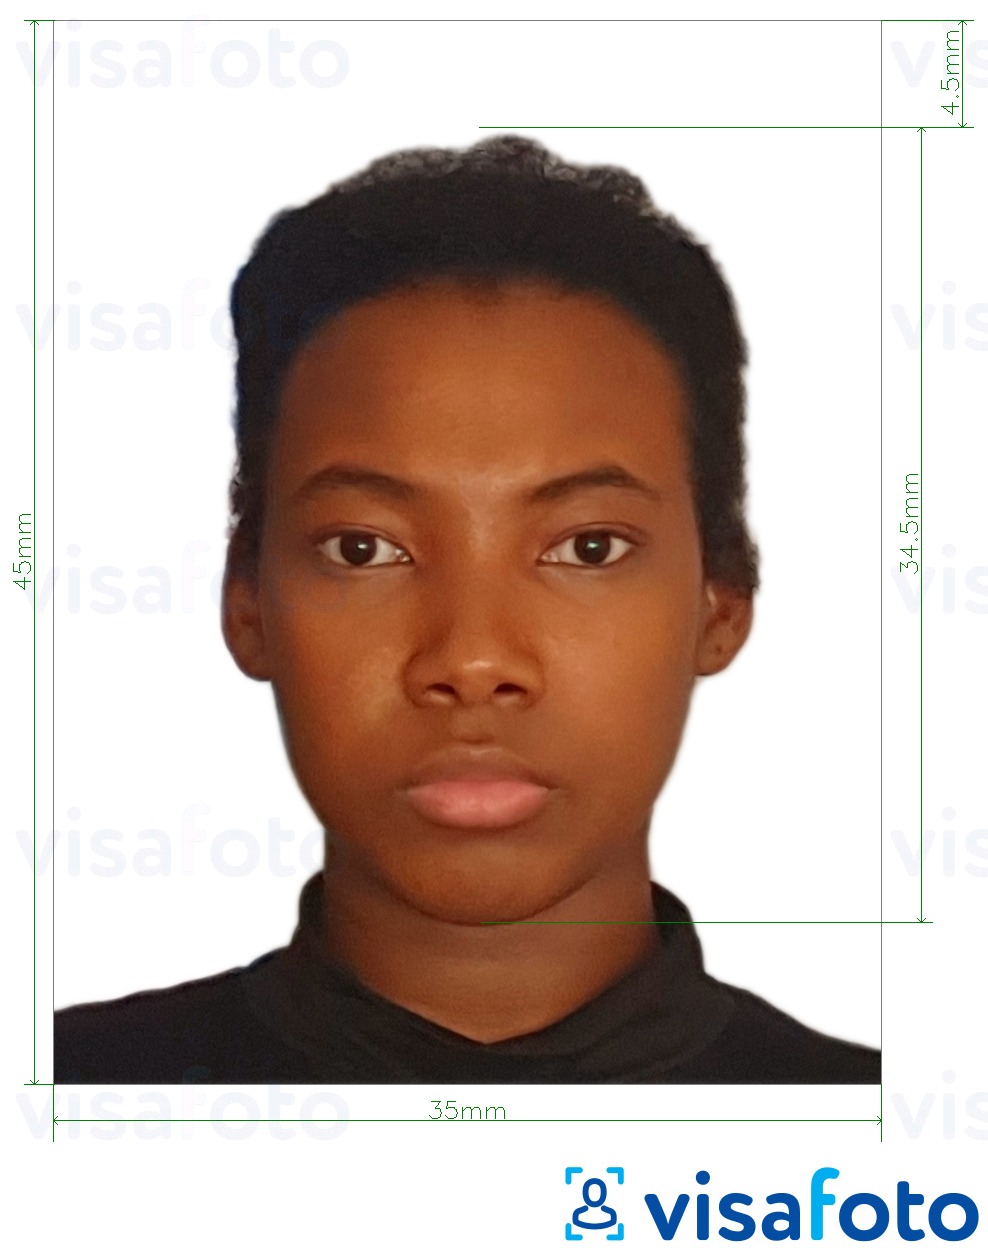 Result example: a correct visa or passport photo that you will receive